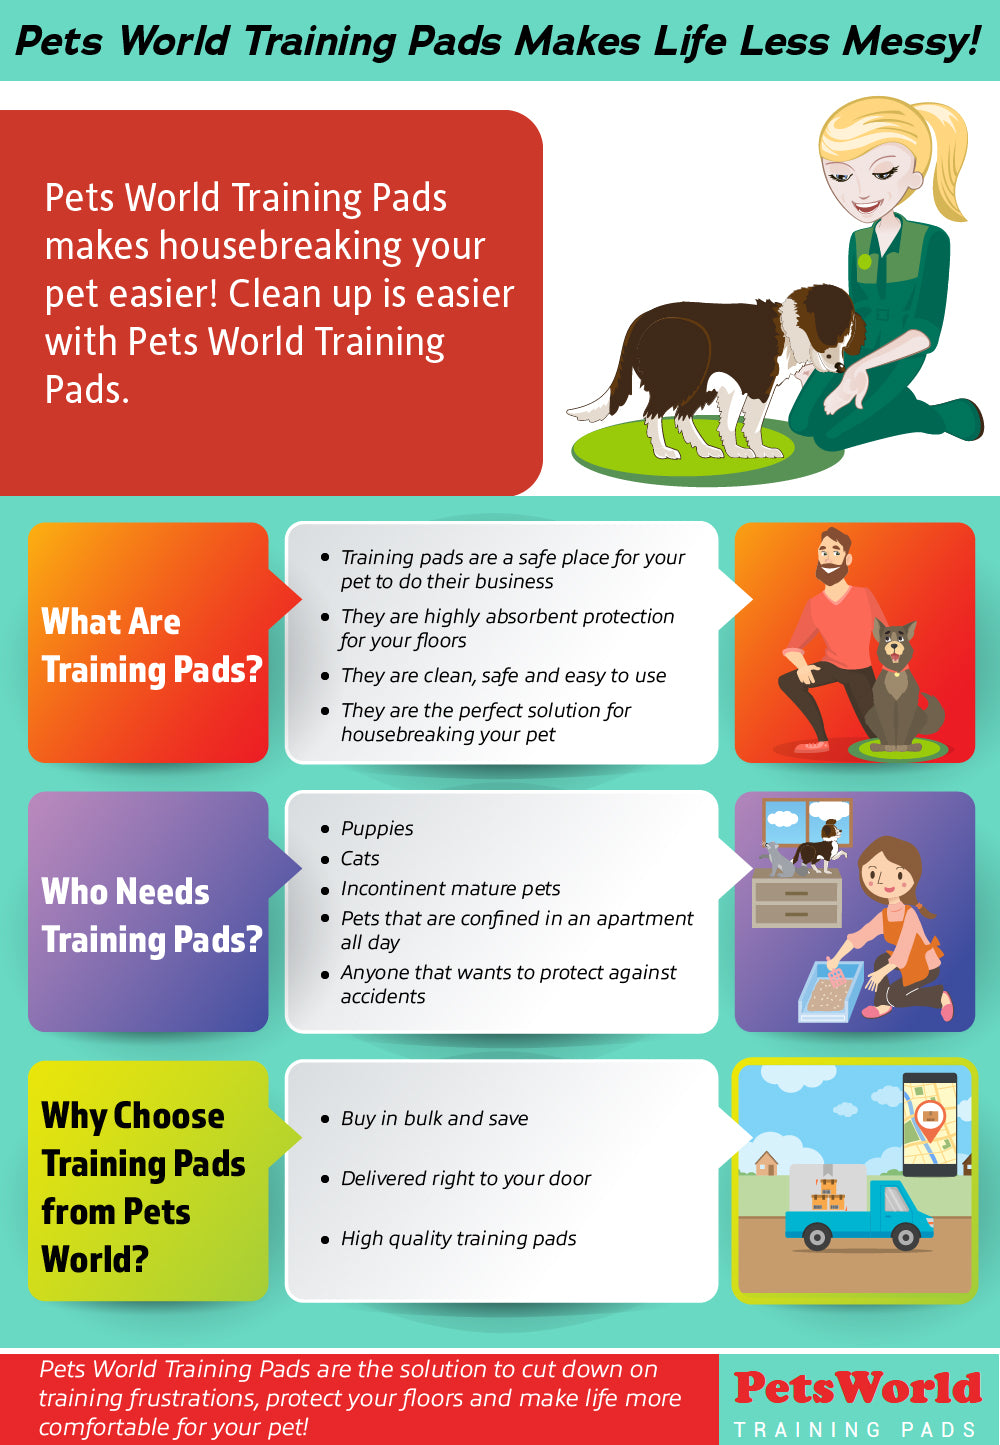 Pets World Training Pads Makes Life Less Messy!